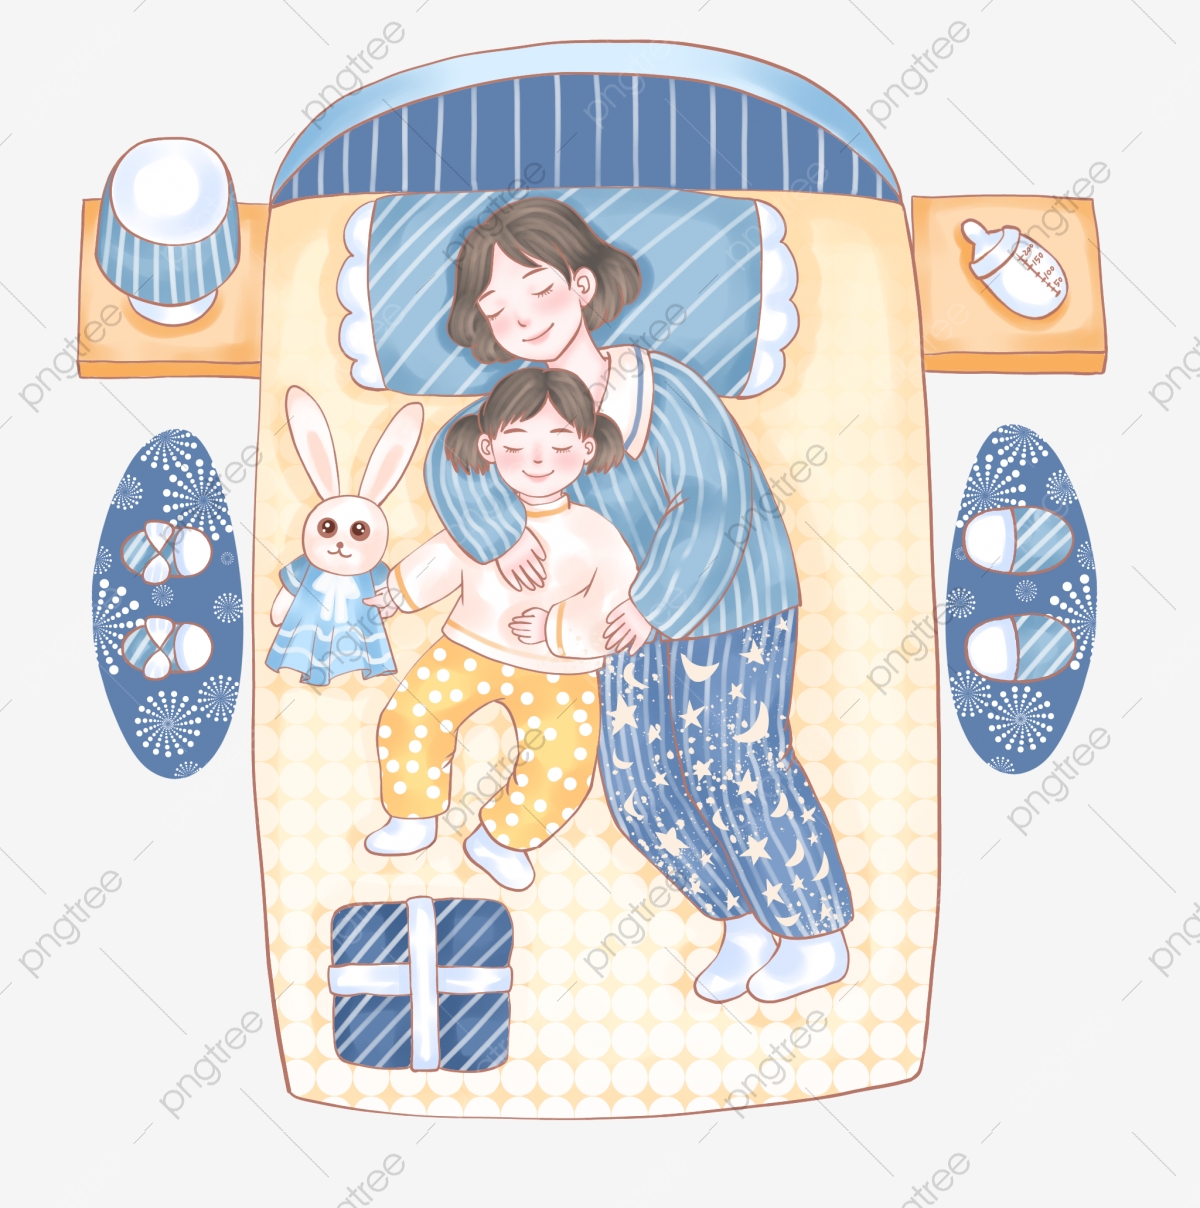 pngtree-world-sleep-day-cartoon-mother-and-daughter-sleeping-png-image_4614452